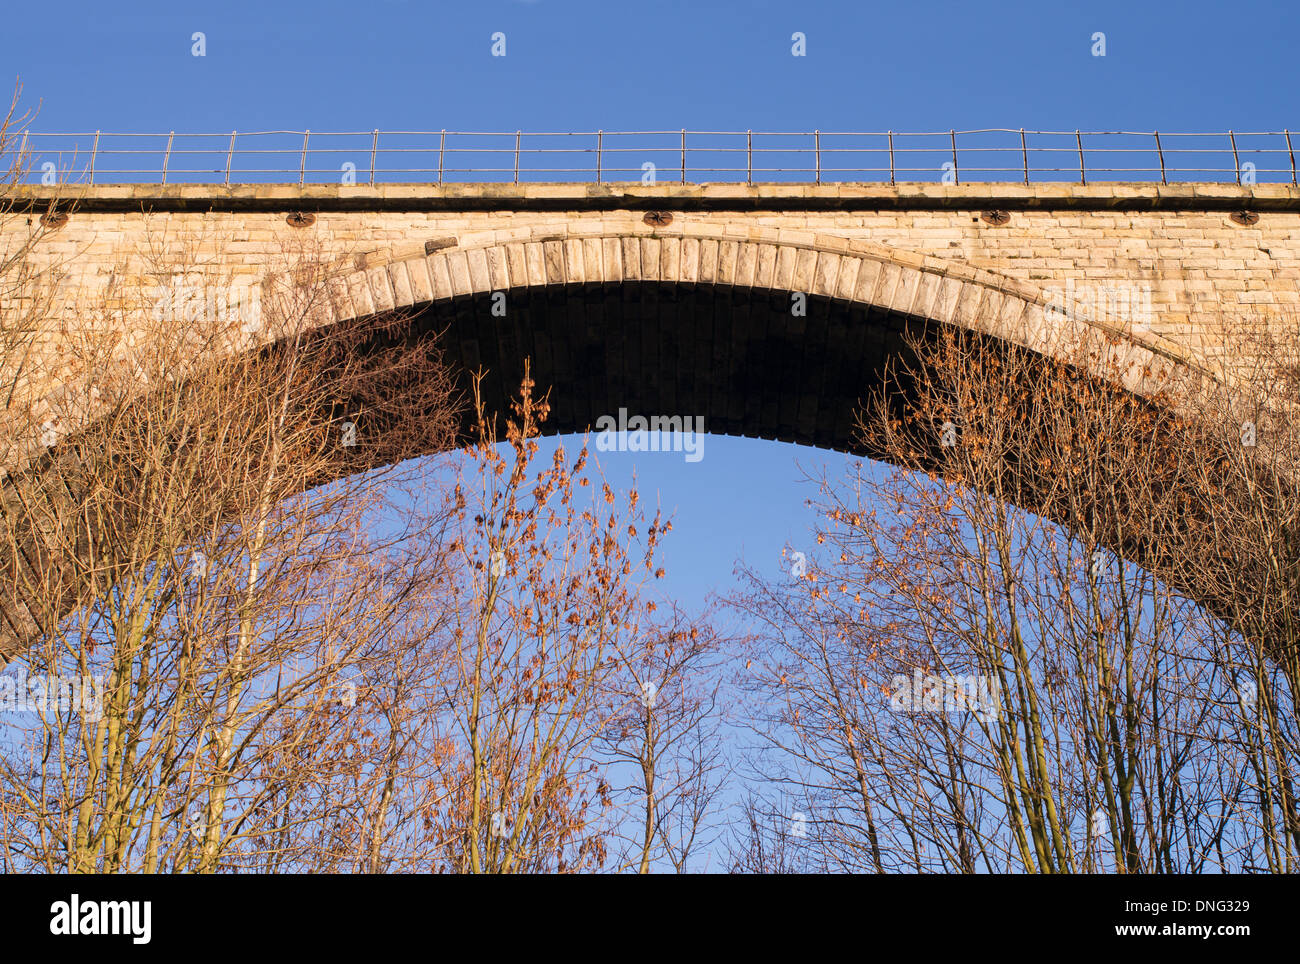 Arch of the Victoria viaduct Victorian railway bridge over the river Wear in Washington, north east England, UK Stock Photo